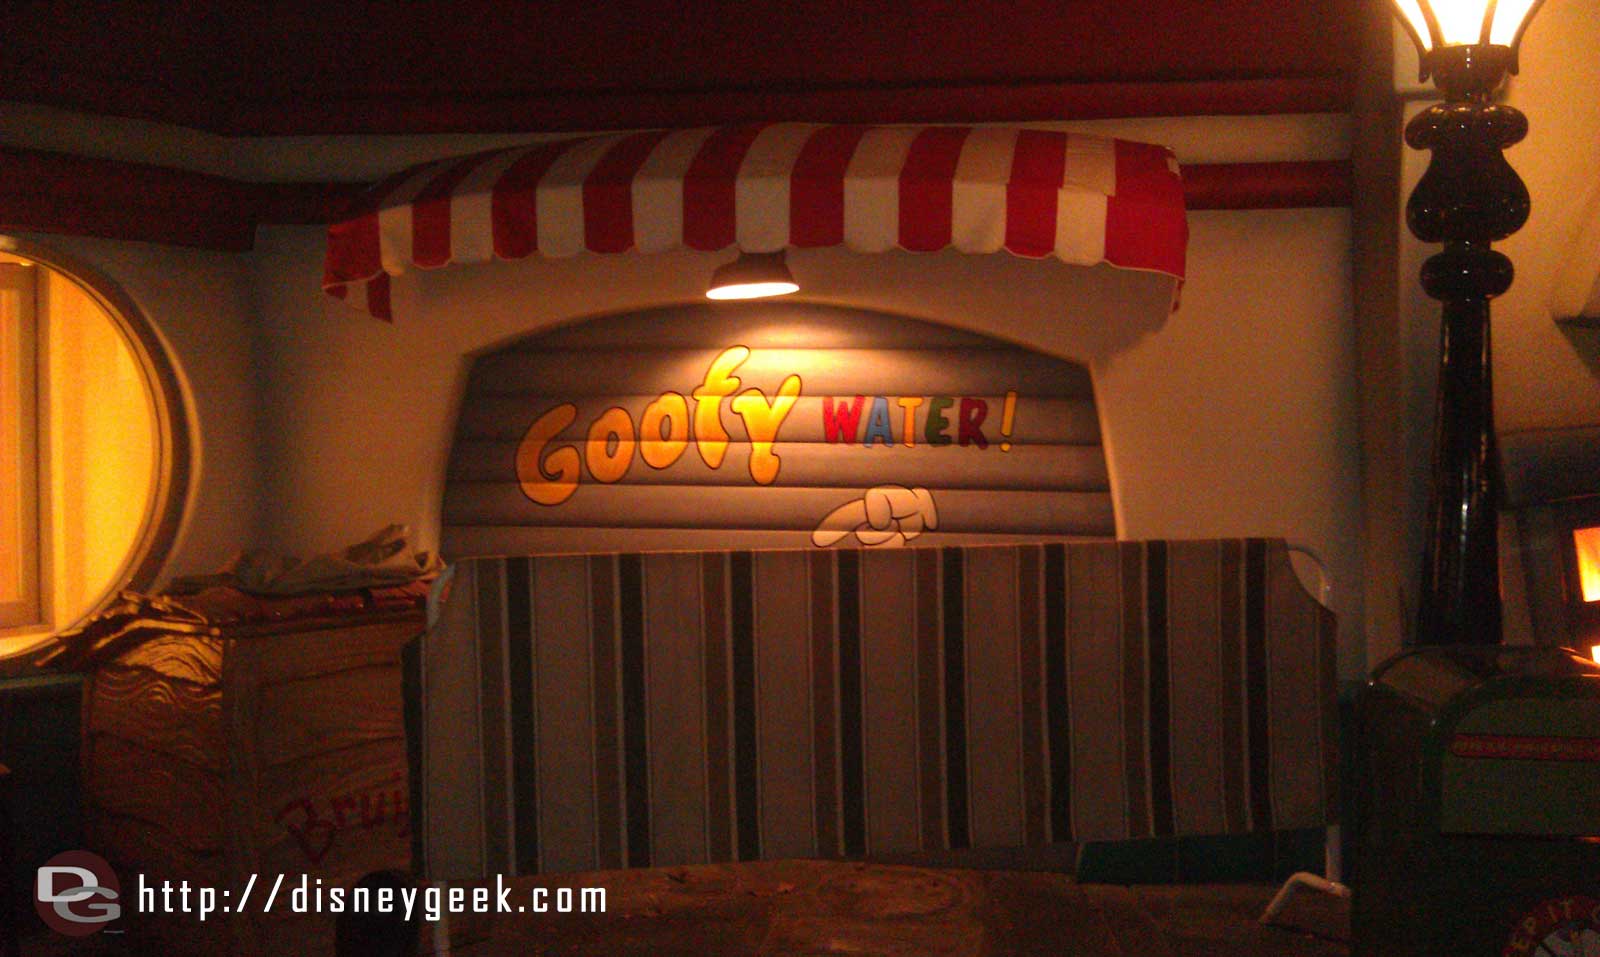 Goofys Gas in Toontown is out from behind scaffolding but still working on the Goofy Water.